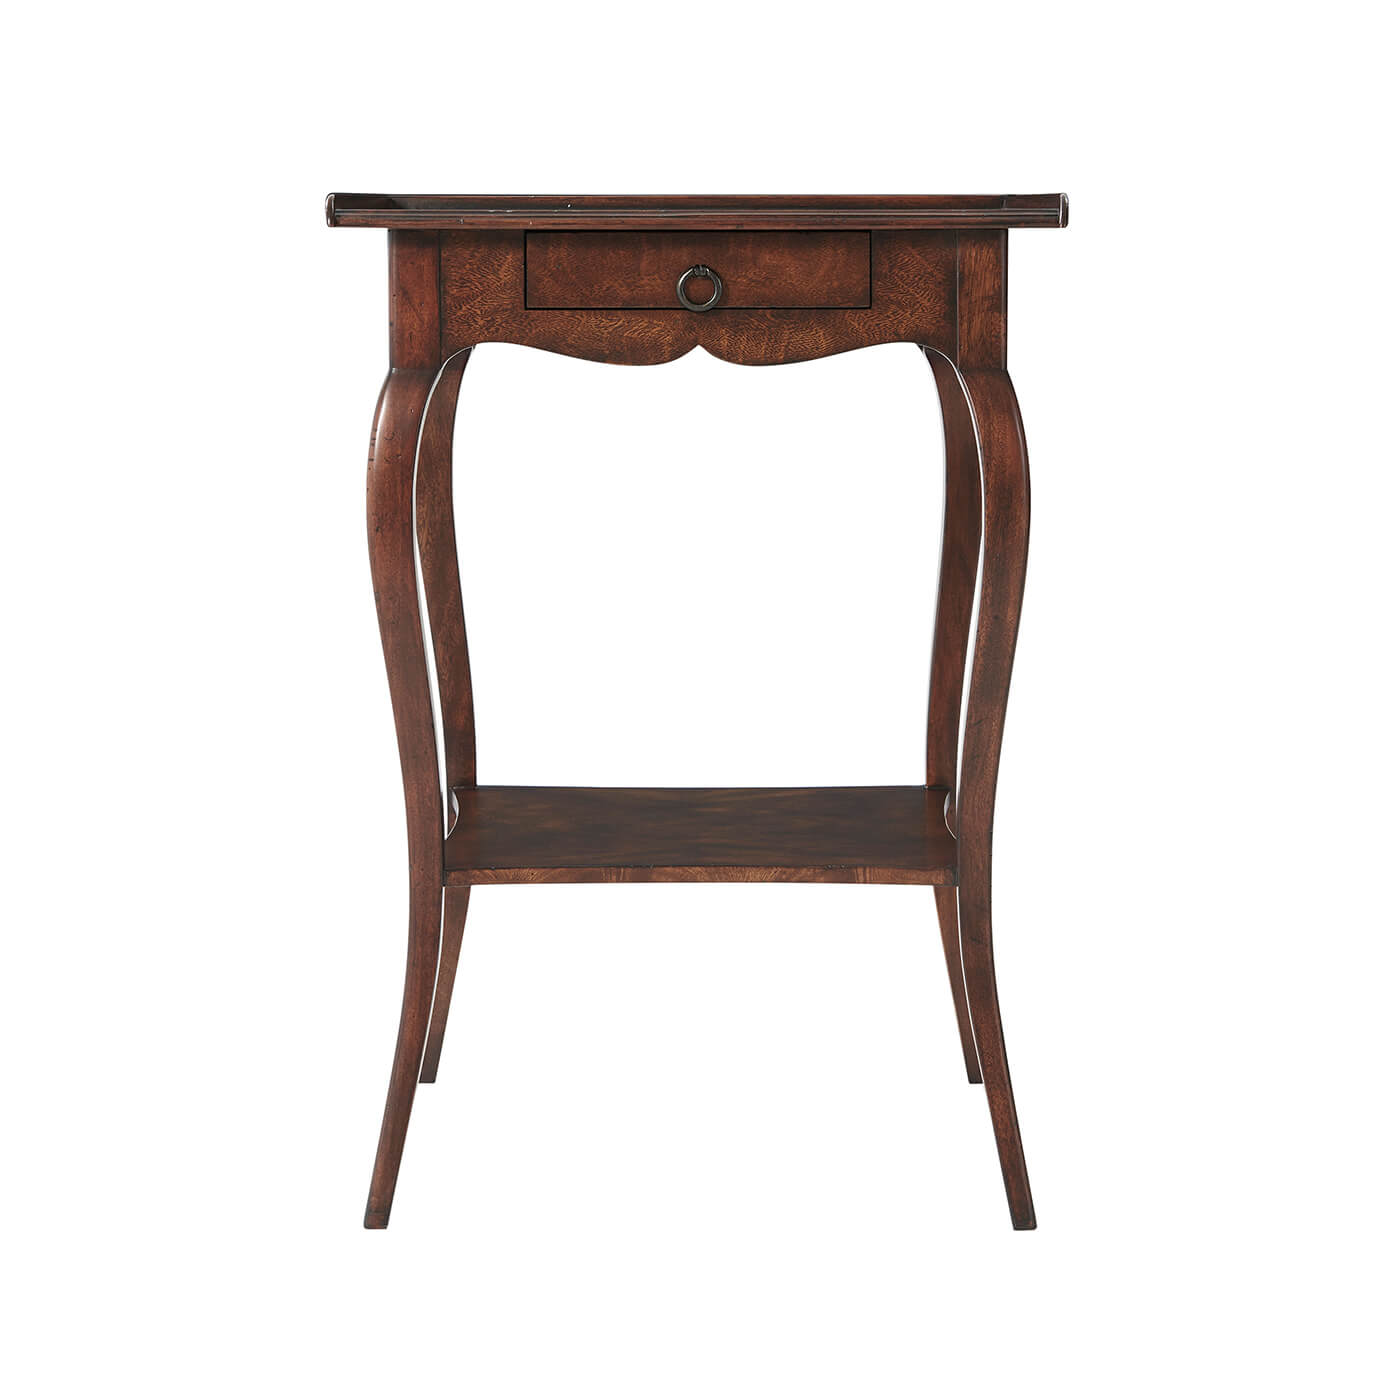 French Provincial Inlaid End Table - English Georgian America